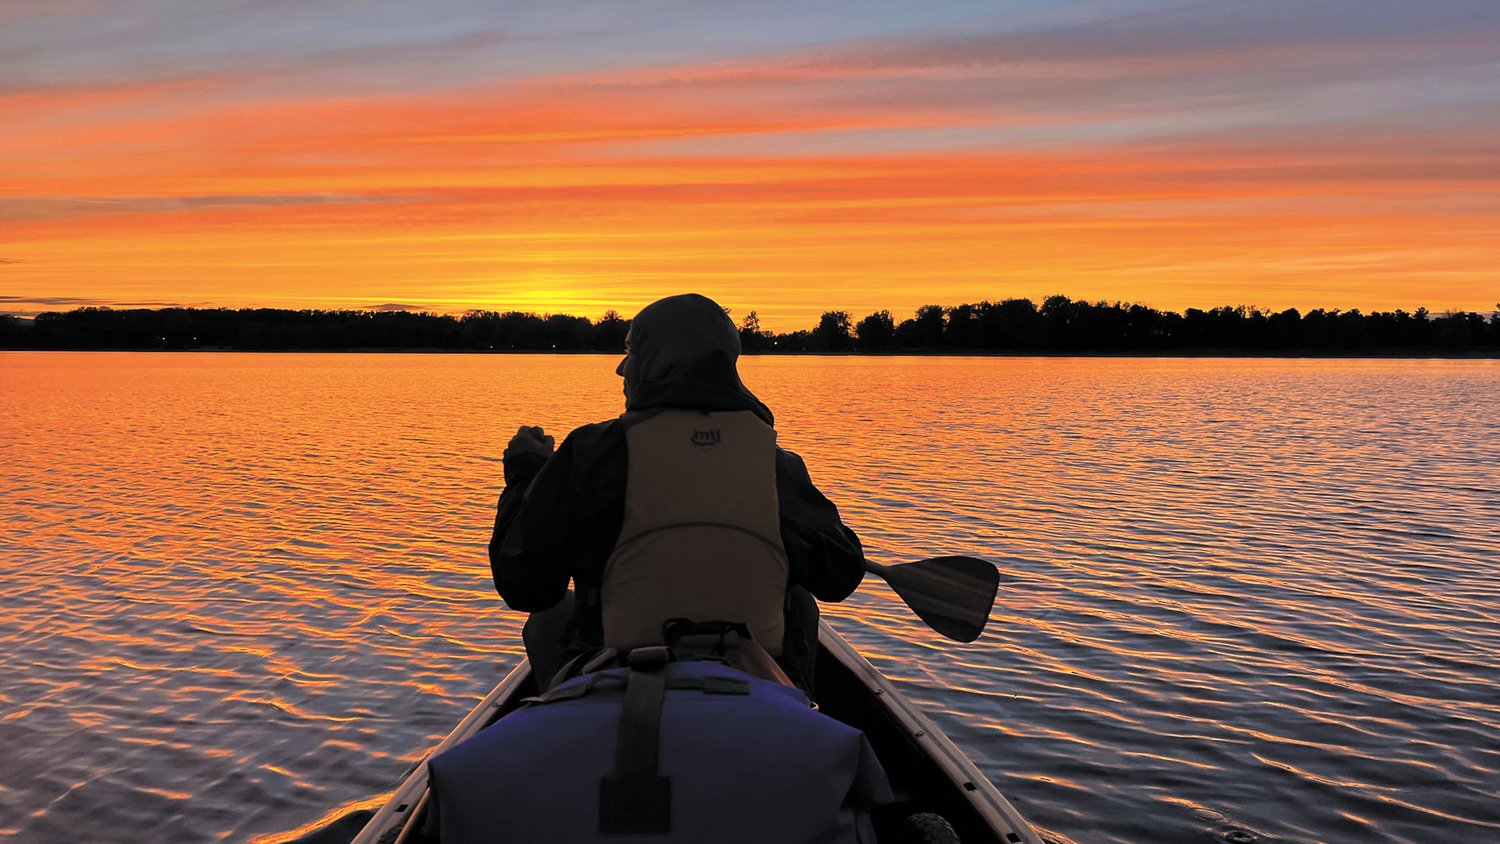 CLOSING OUT THE DAY: Final paddle before calling it a night.